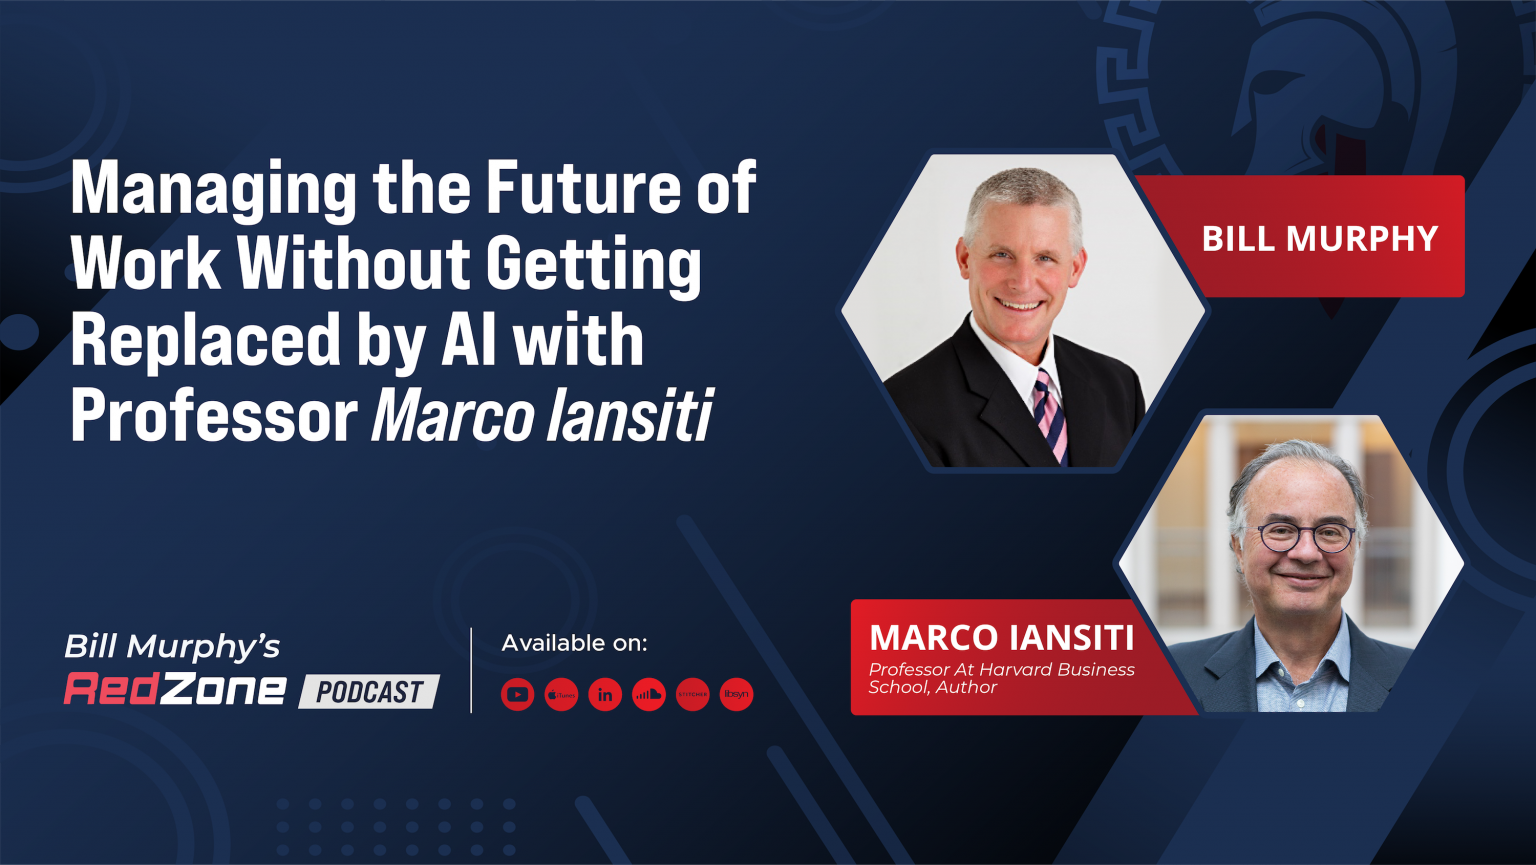  Managing the Future of Work Without Getting Replaced by AI with Professor Marco Iansiti